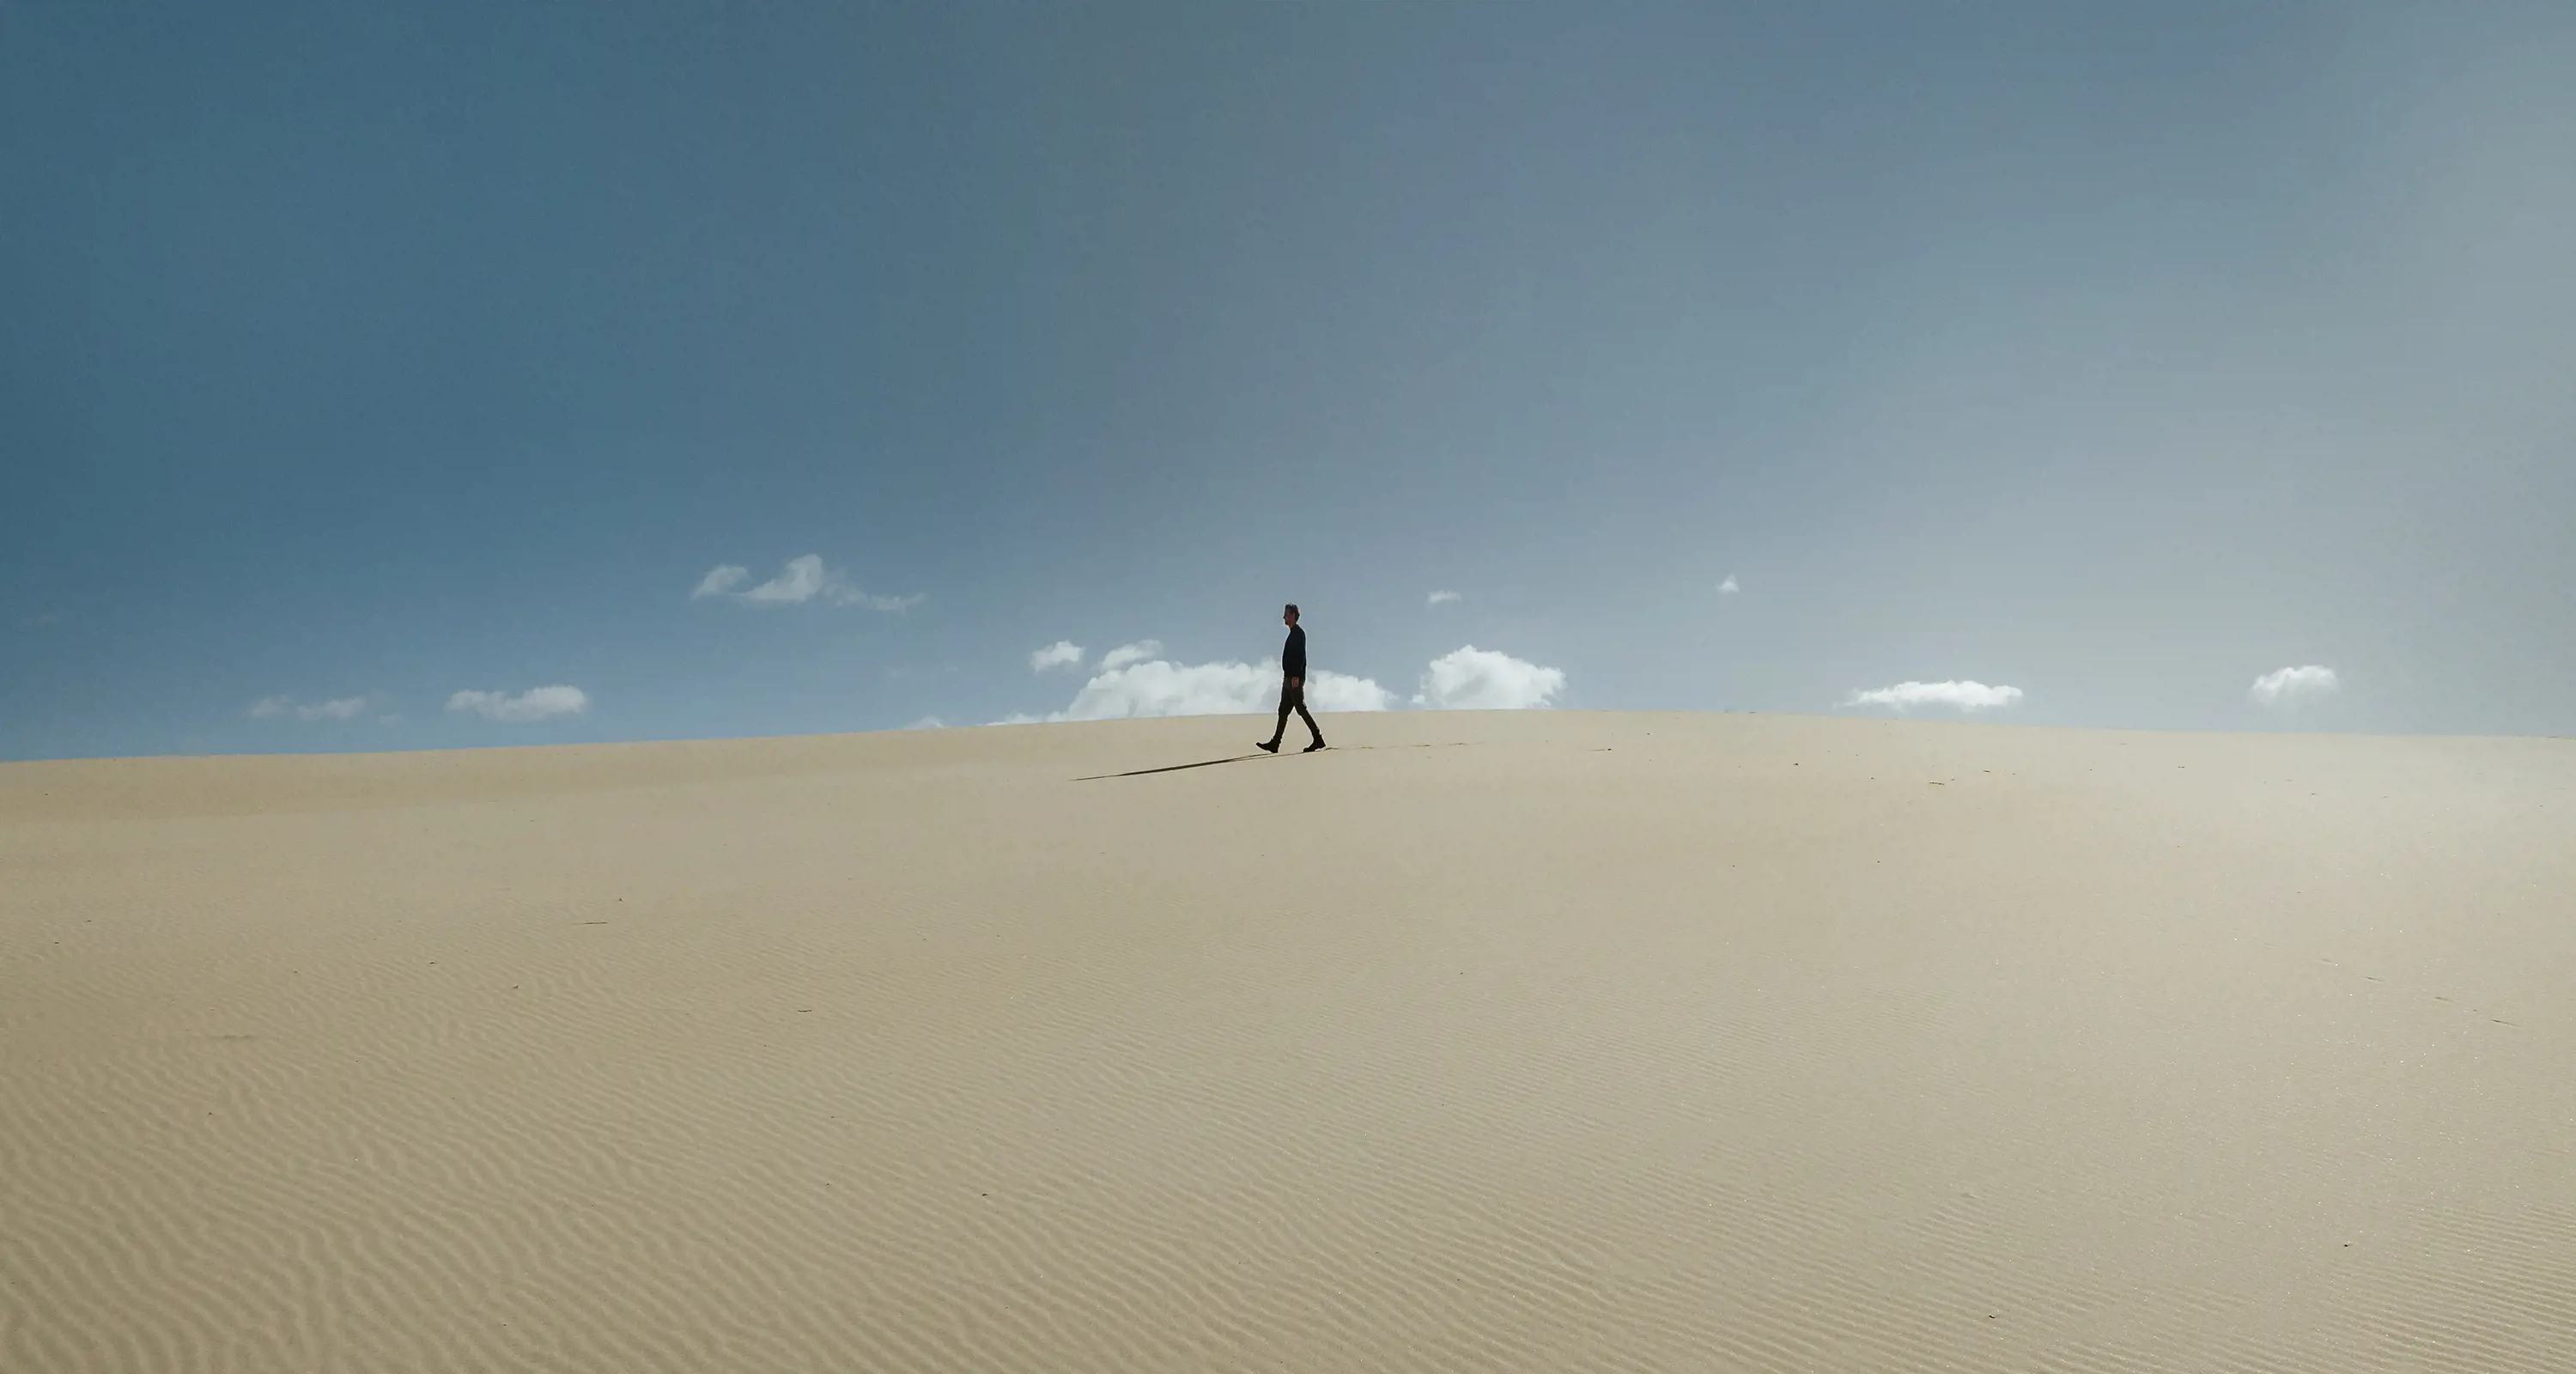 A man walks along the top of a large sand dune on a almost cloudless, sunny day.